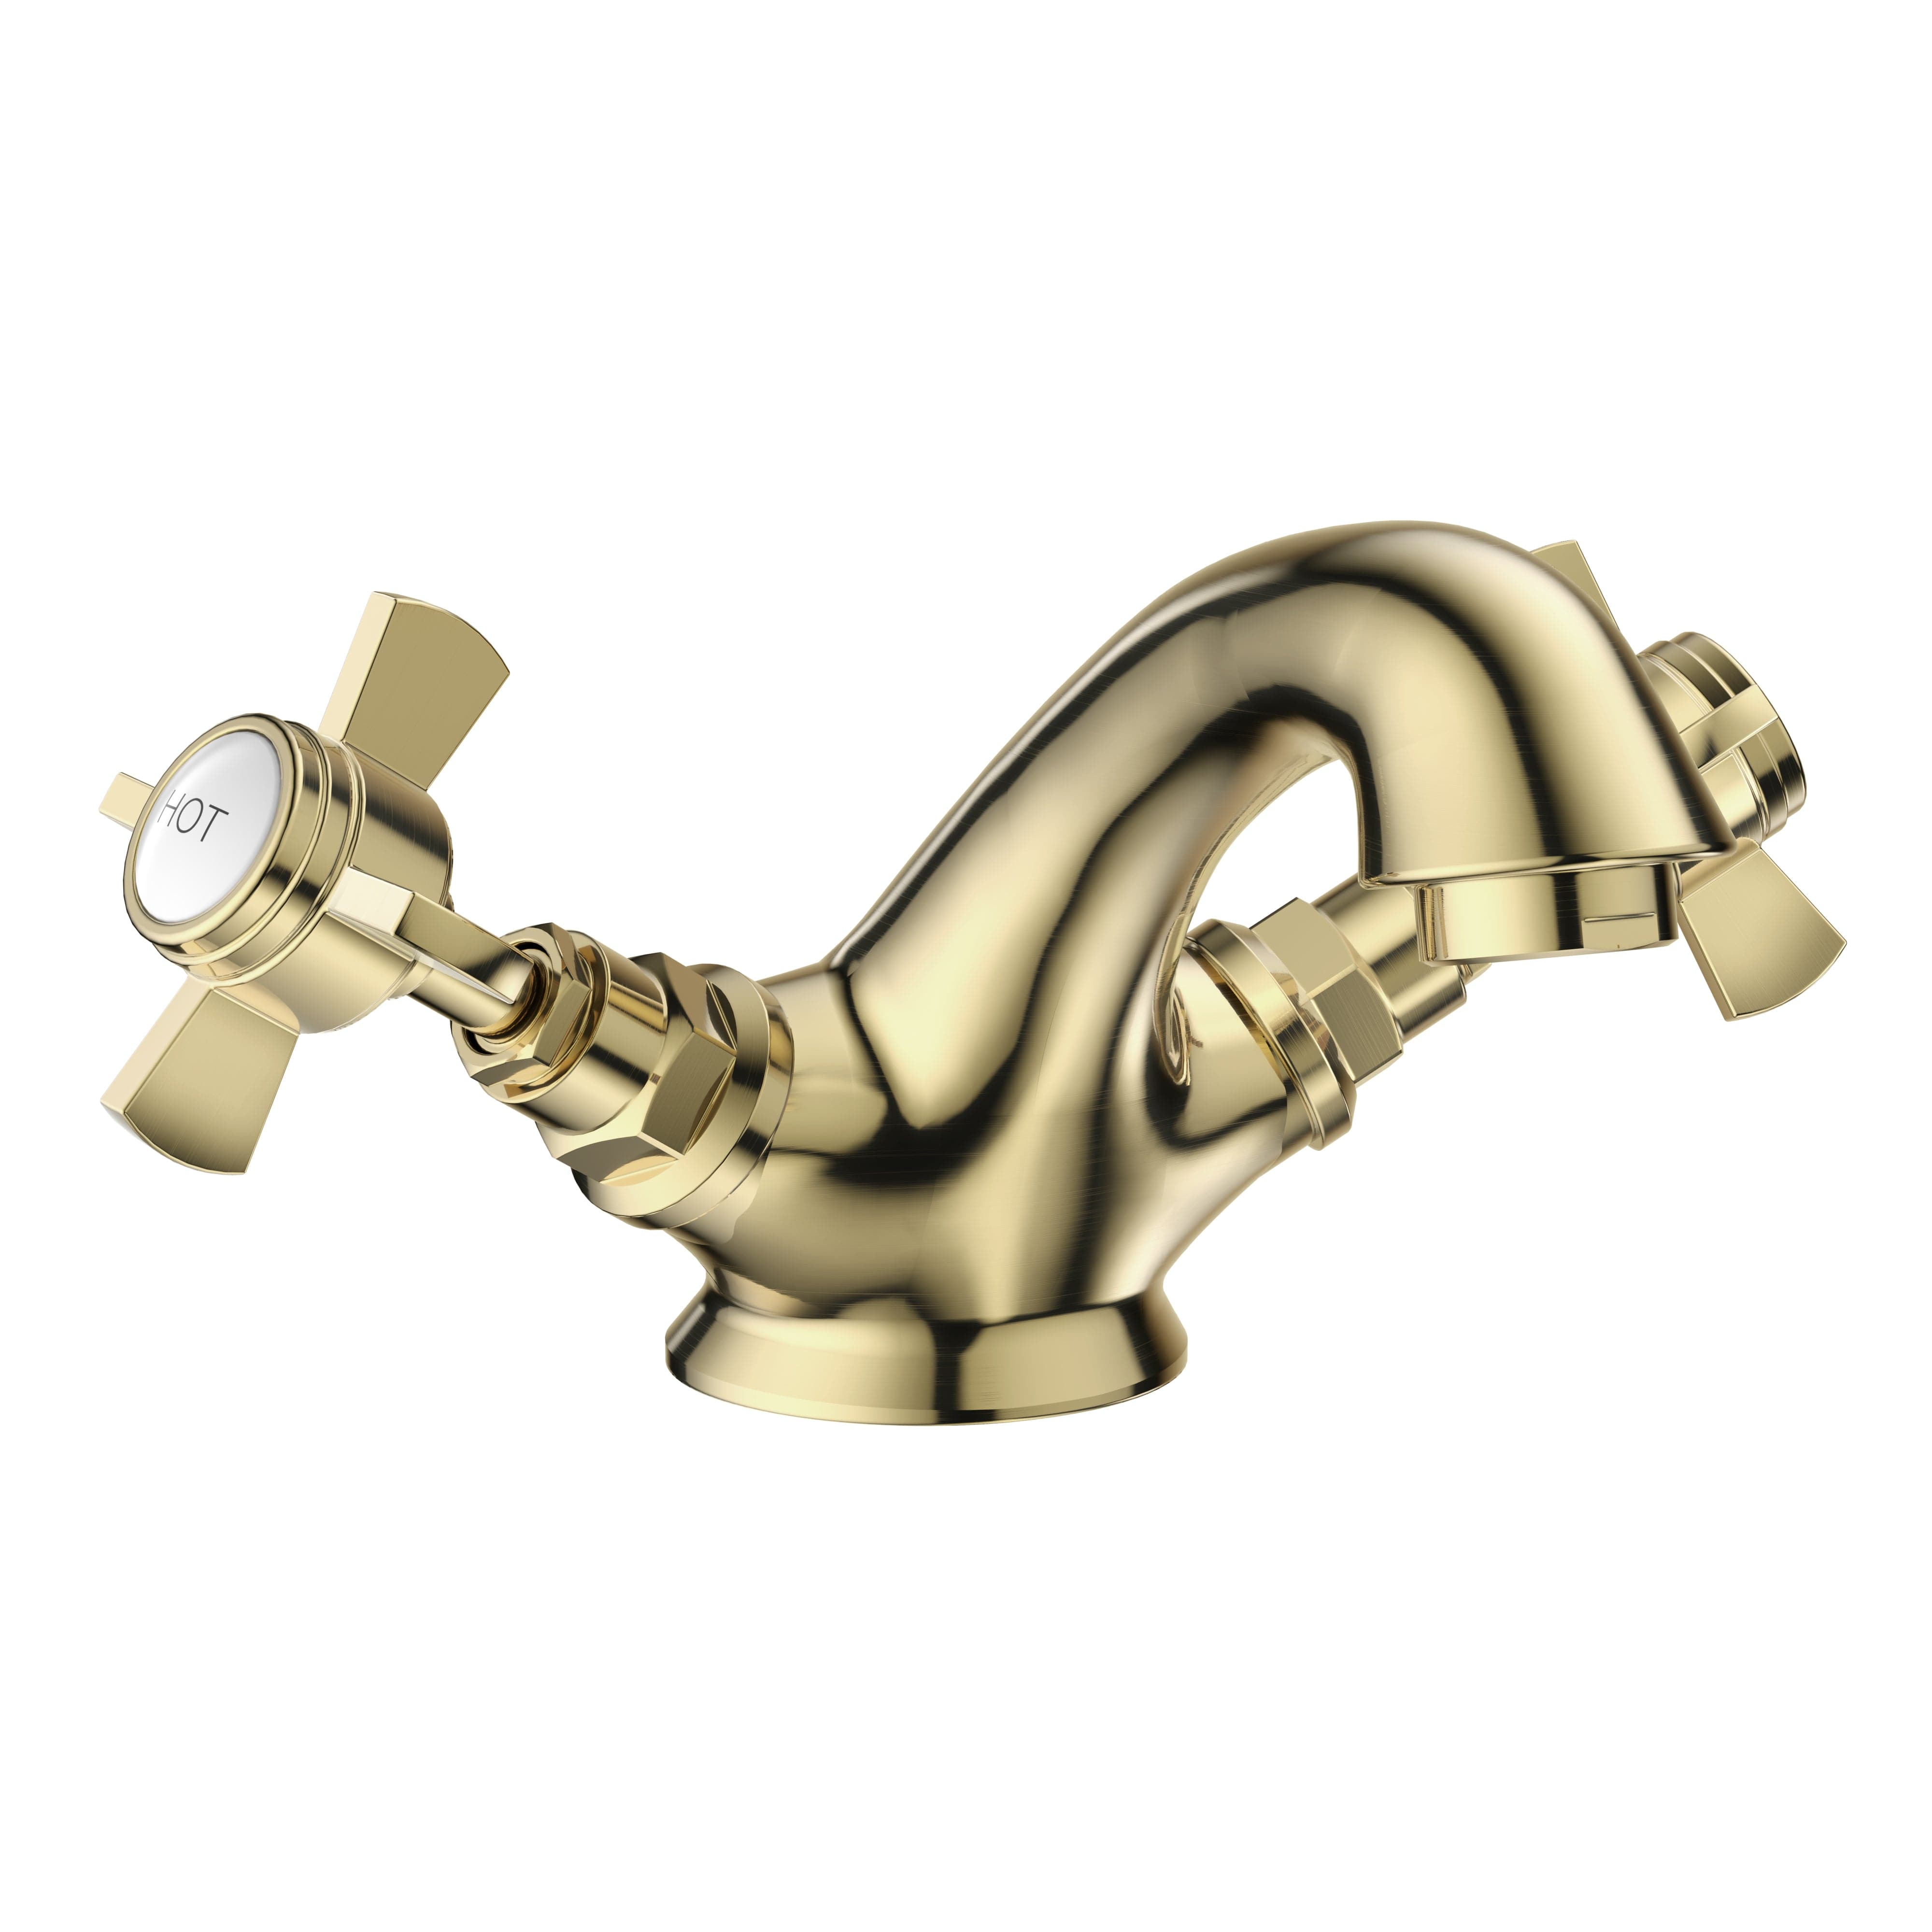 Regency Traditional Mono Basin Mixer Tap with Waste in Brushed Brass finish, elegant design for classic bathrooms. Buy now for timeless style.